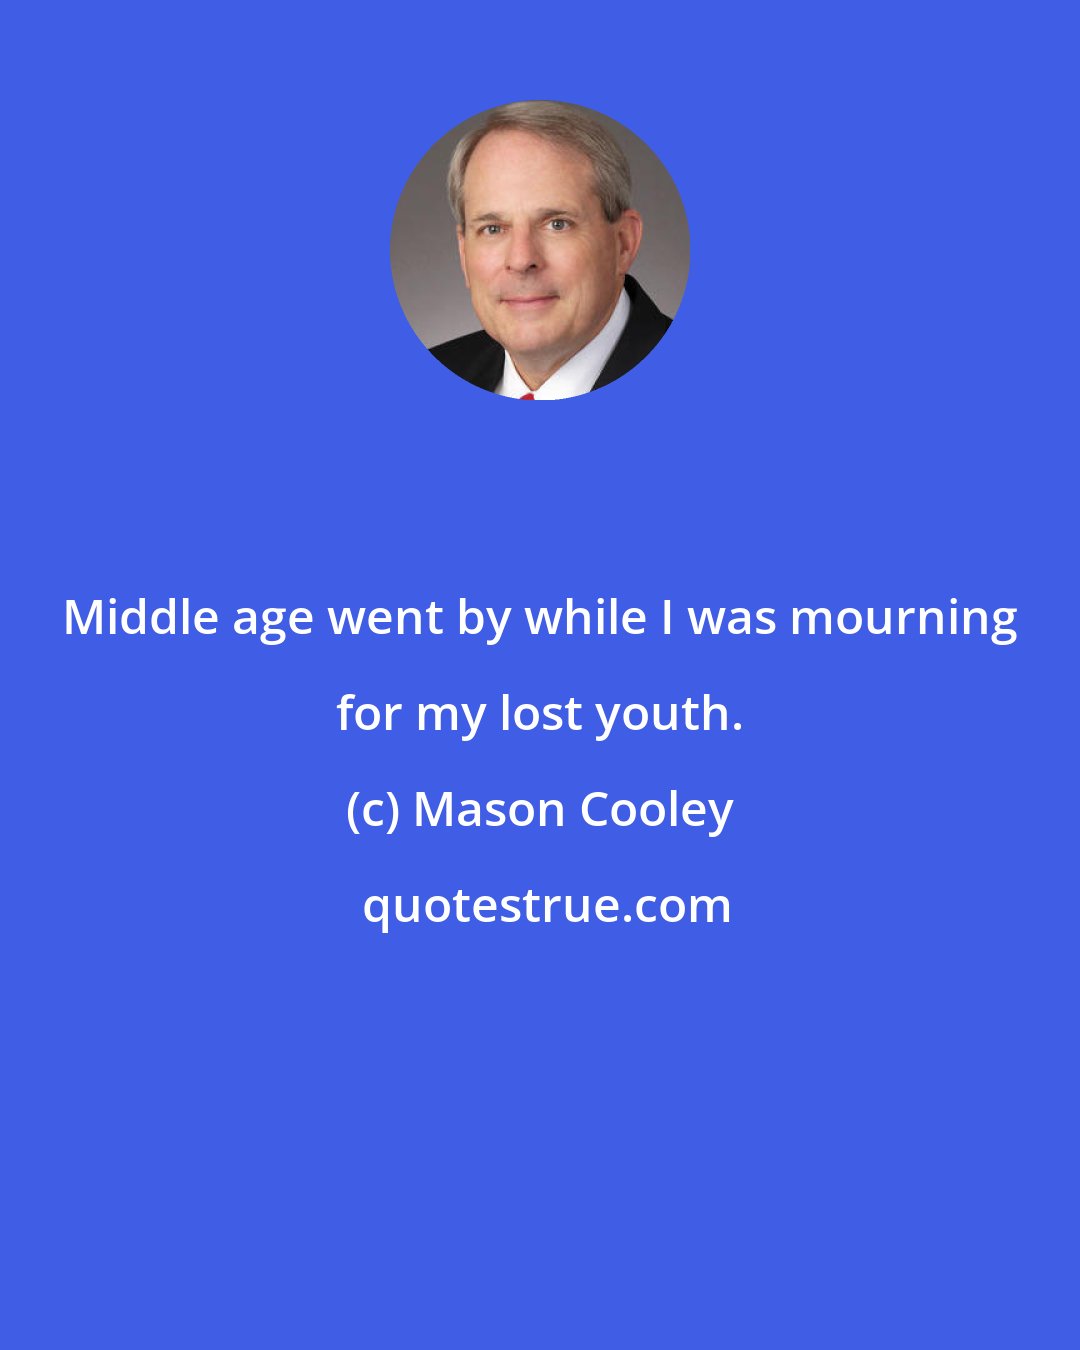 Mason Cooley: Middle age went by while I was mourning for my lost youth.